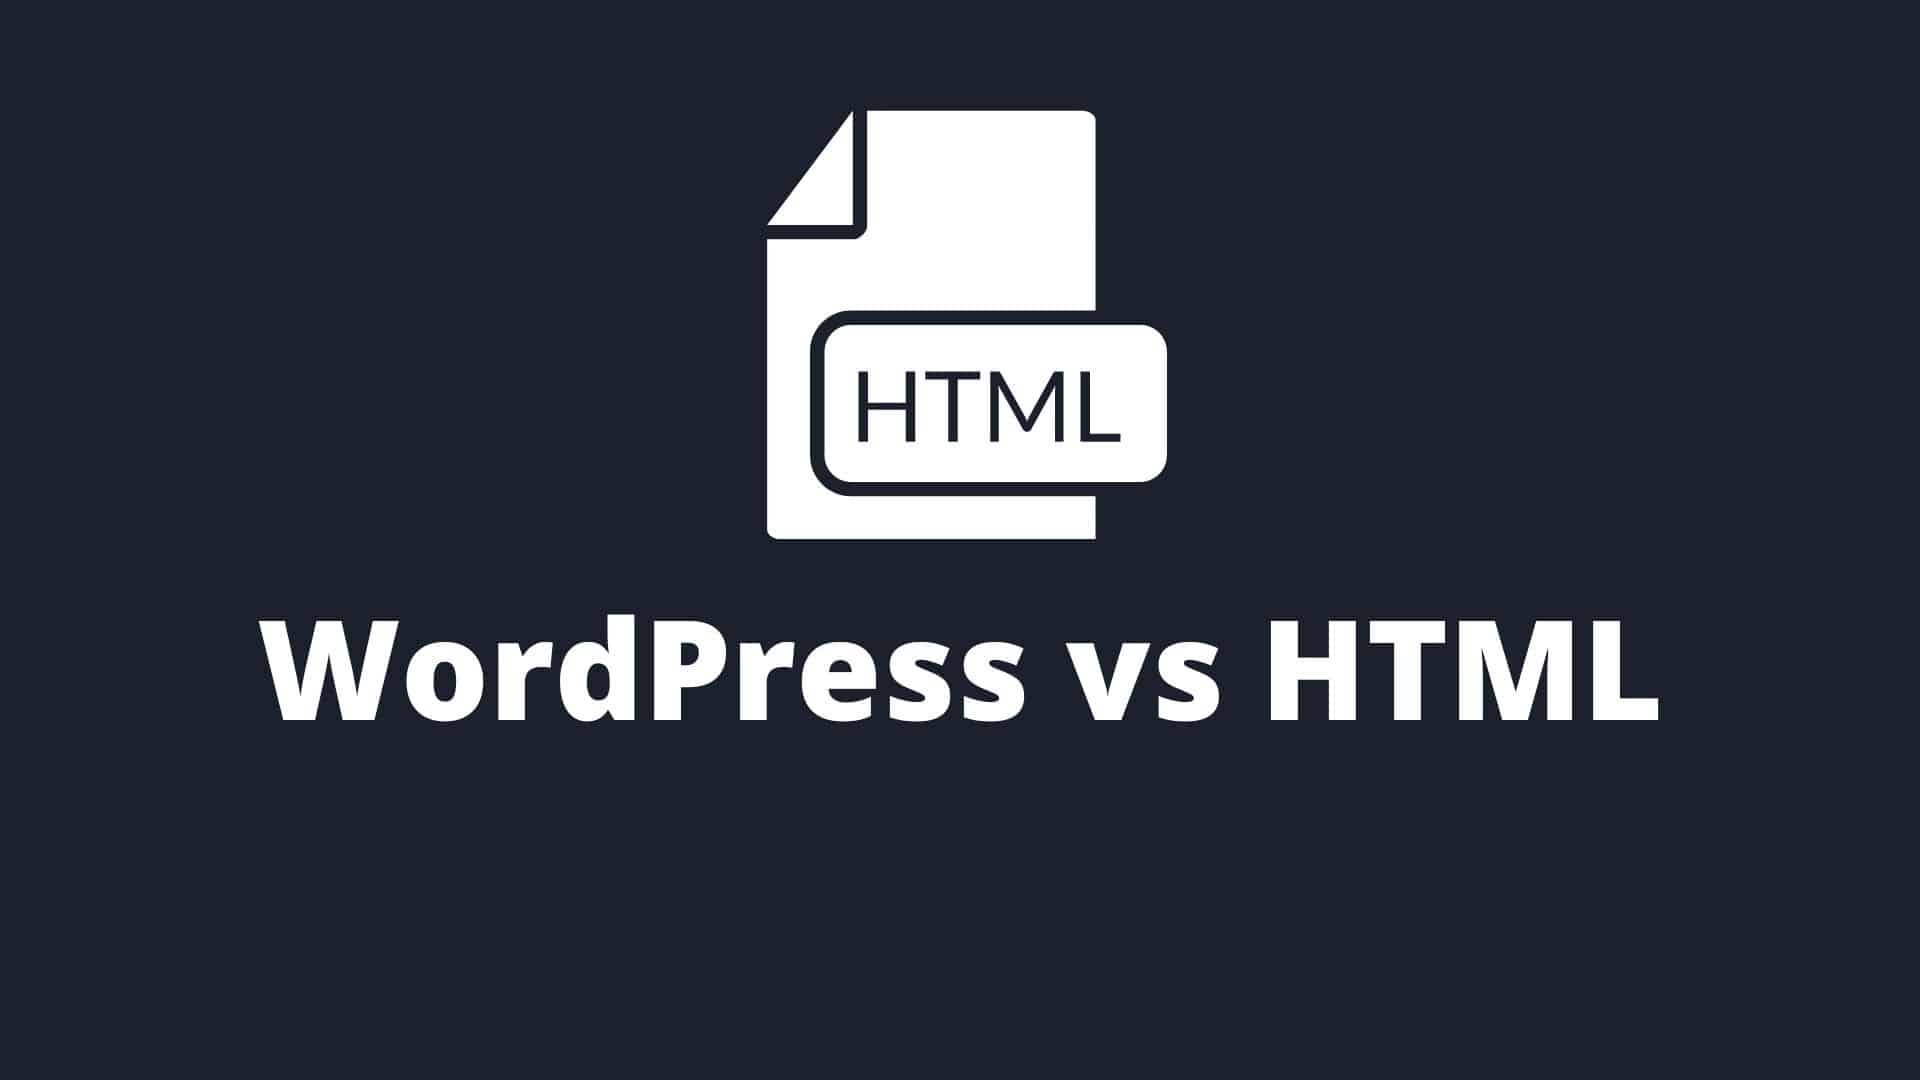 Which is better a website on WordPress or HTML Website?